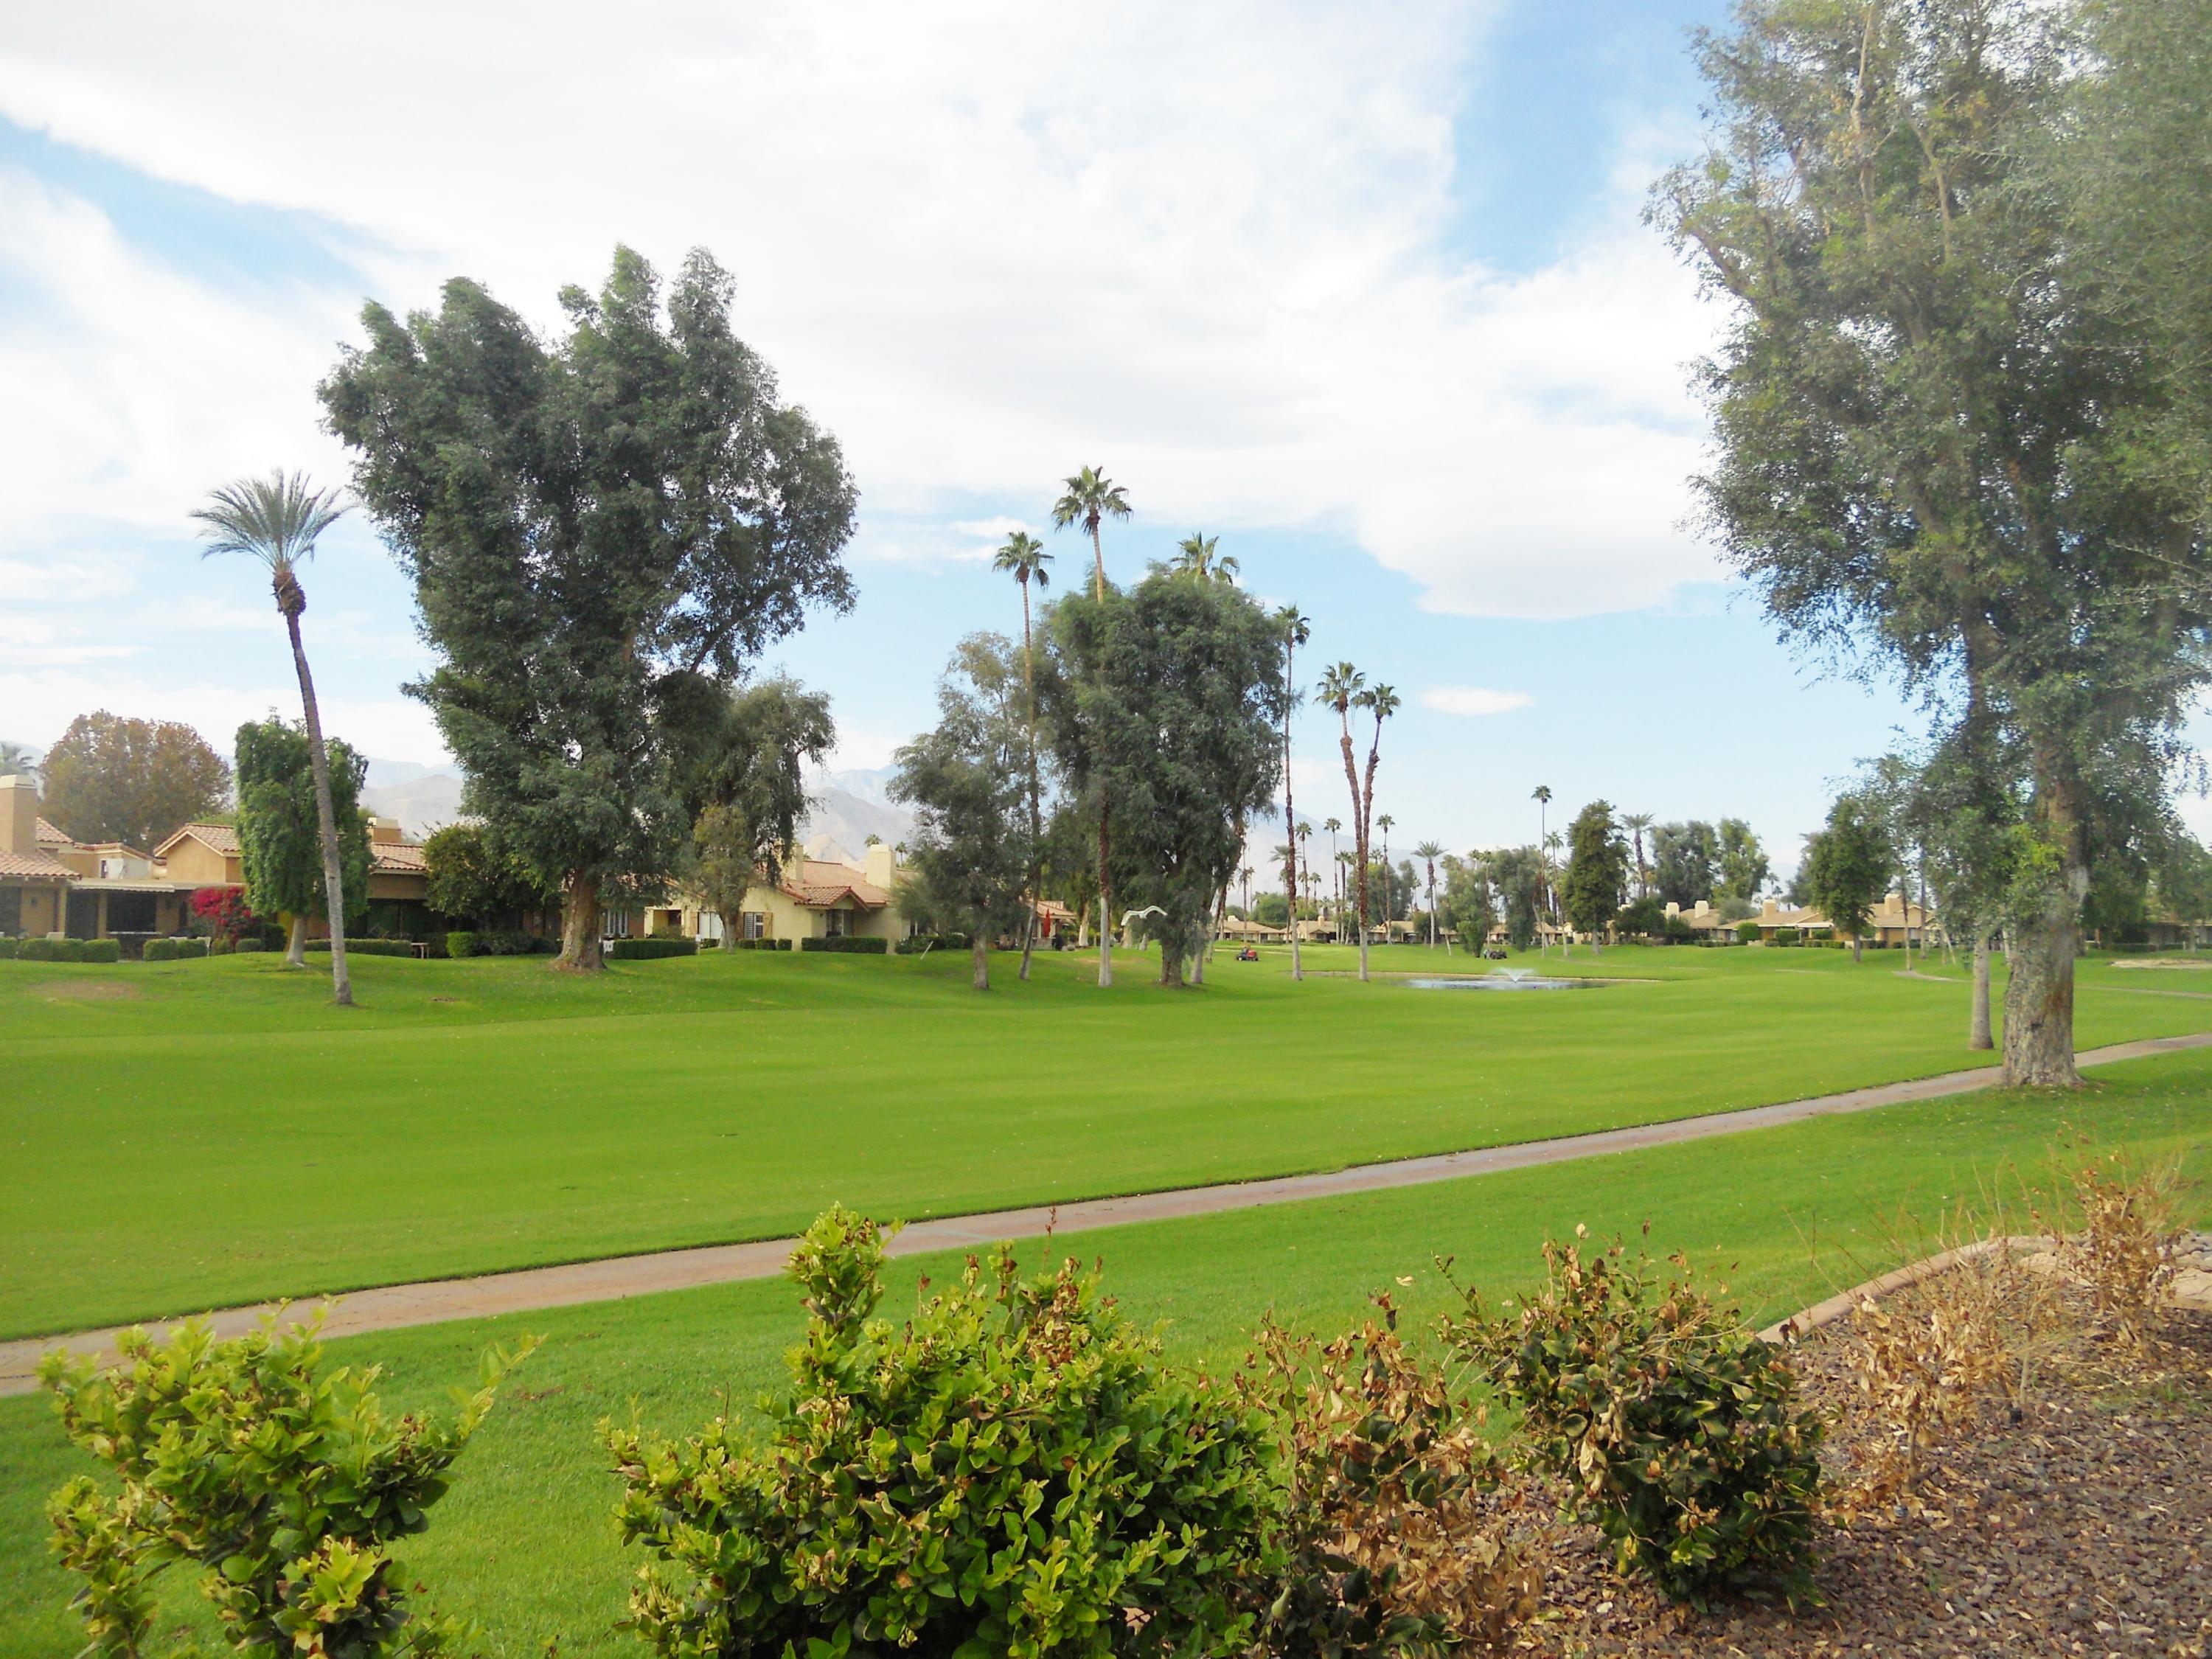 a view of a golf course with a large trees